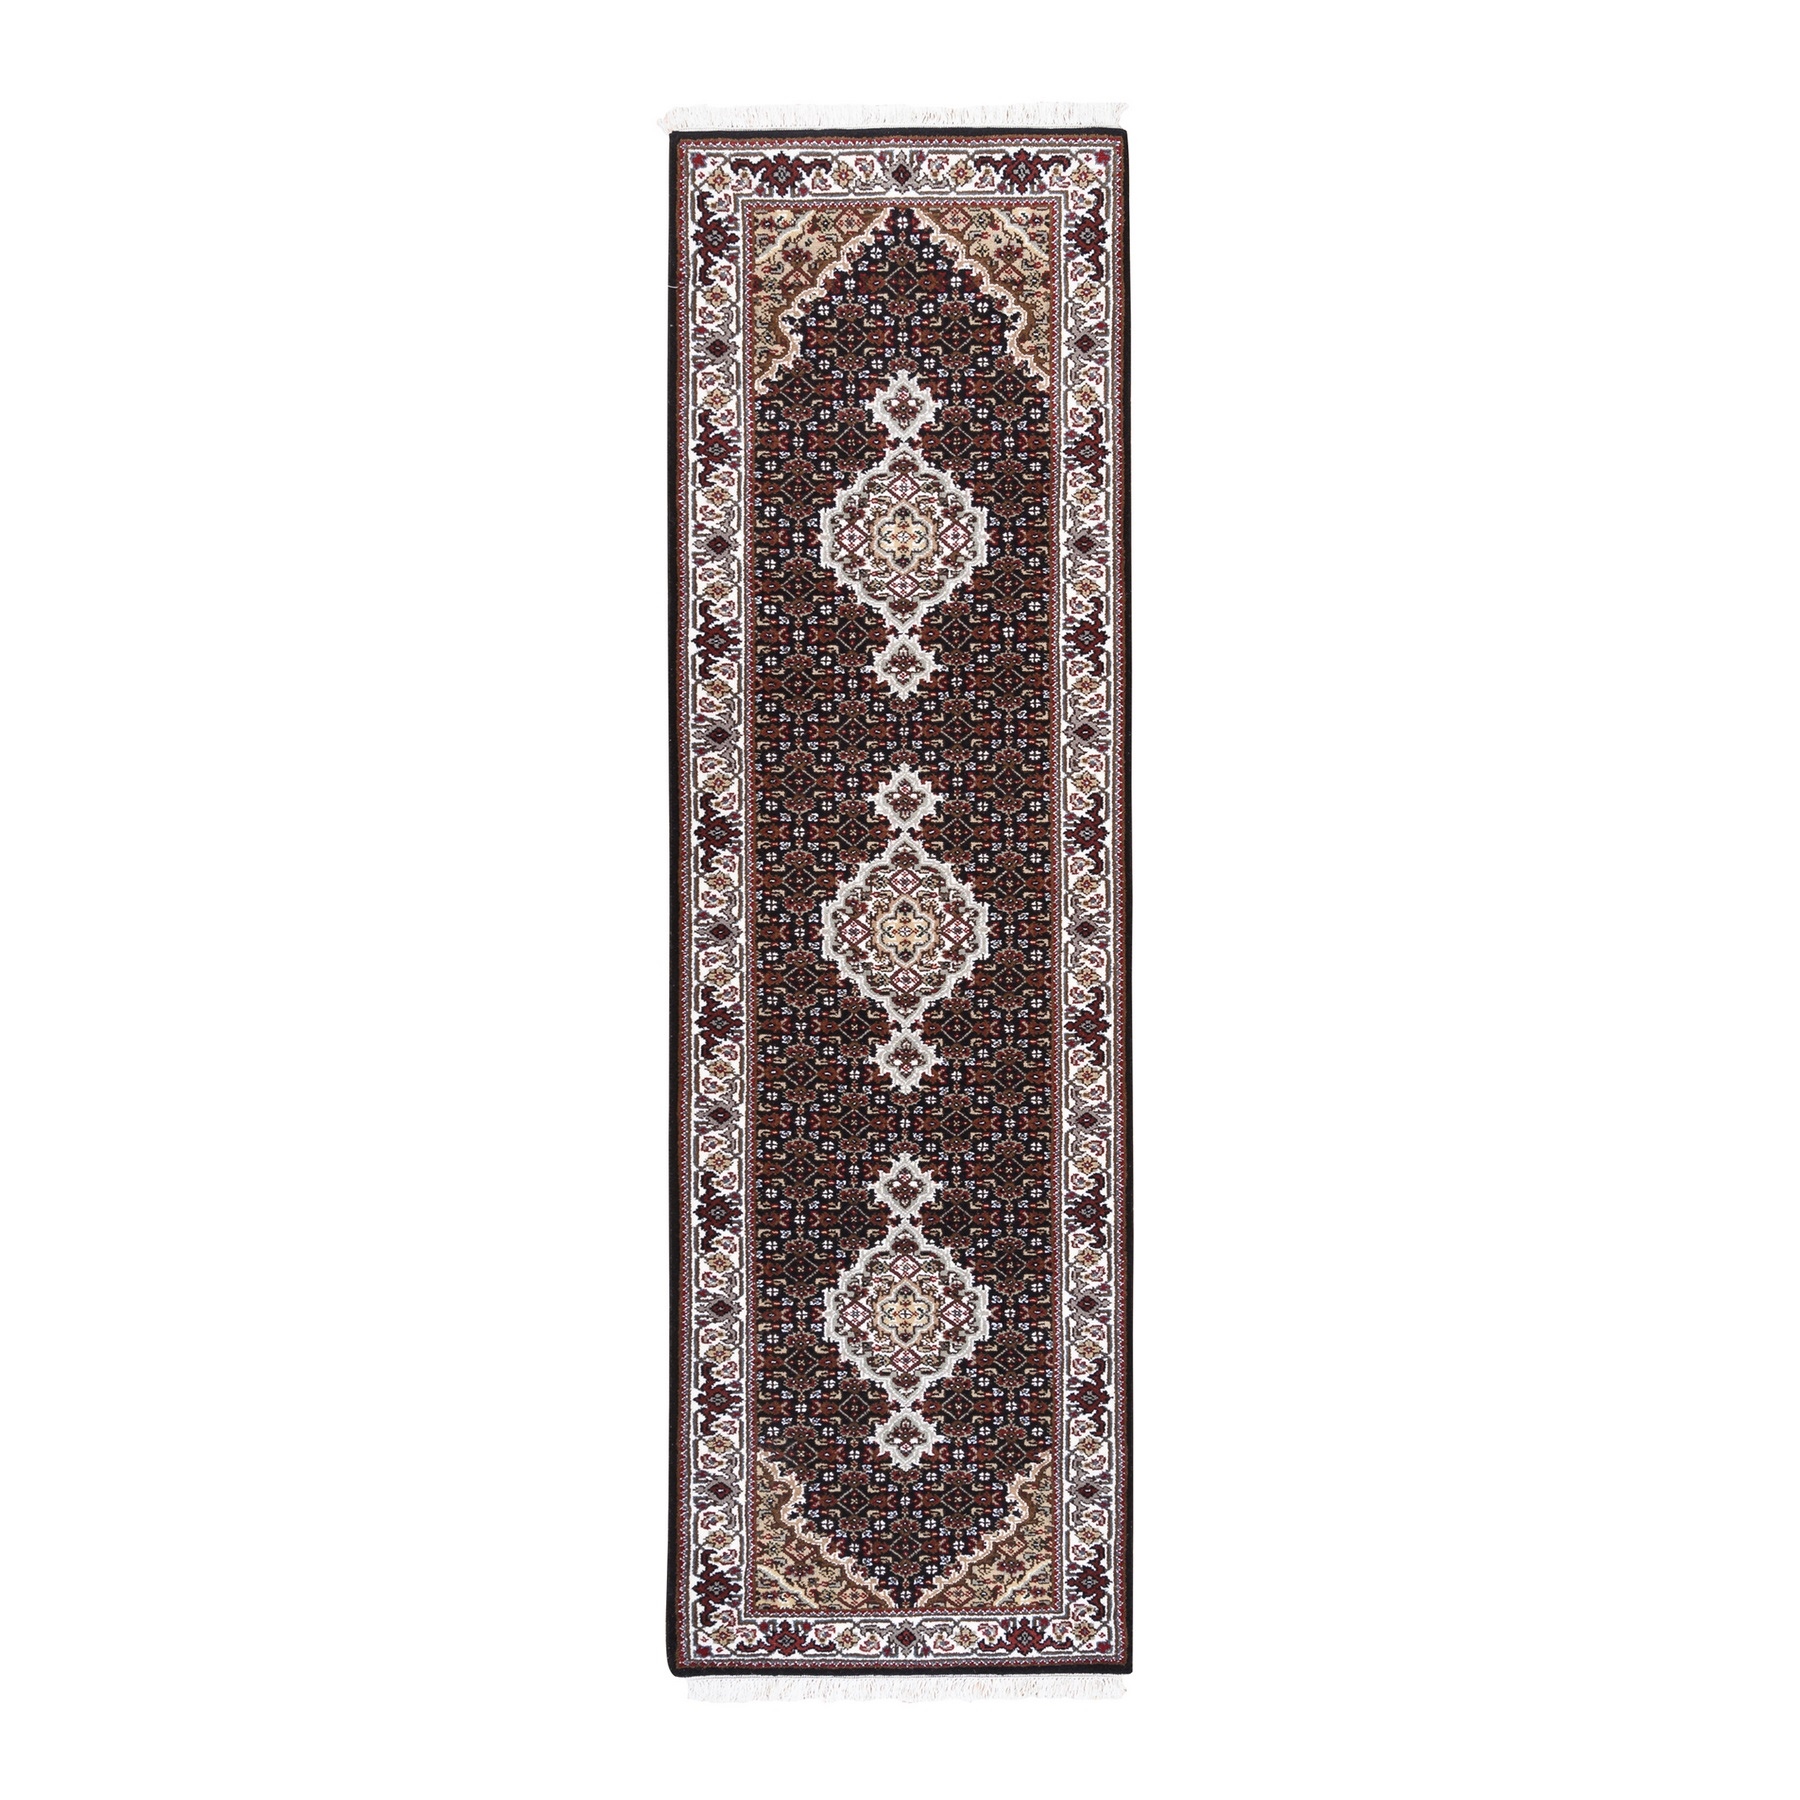 Pirniakan Collection Hand Knotted Black Rug No: 1125116